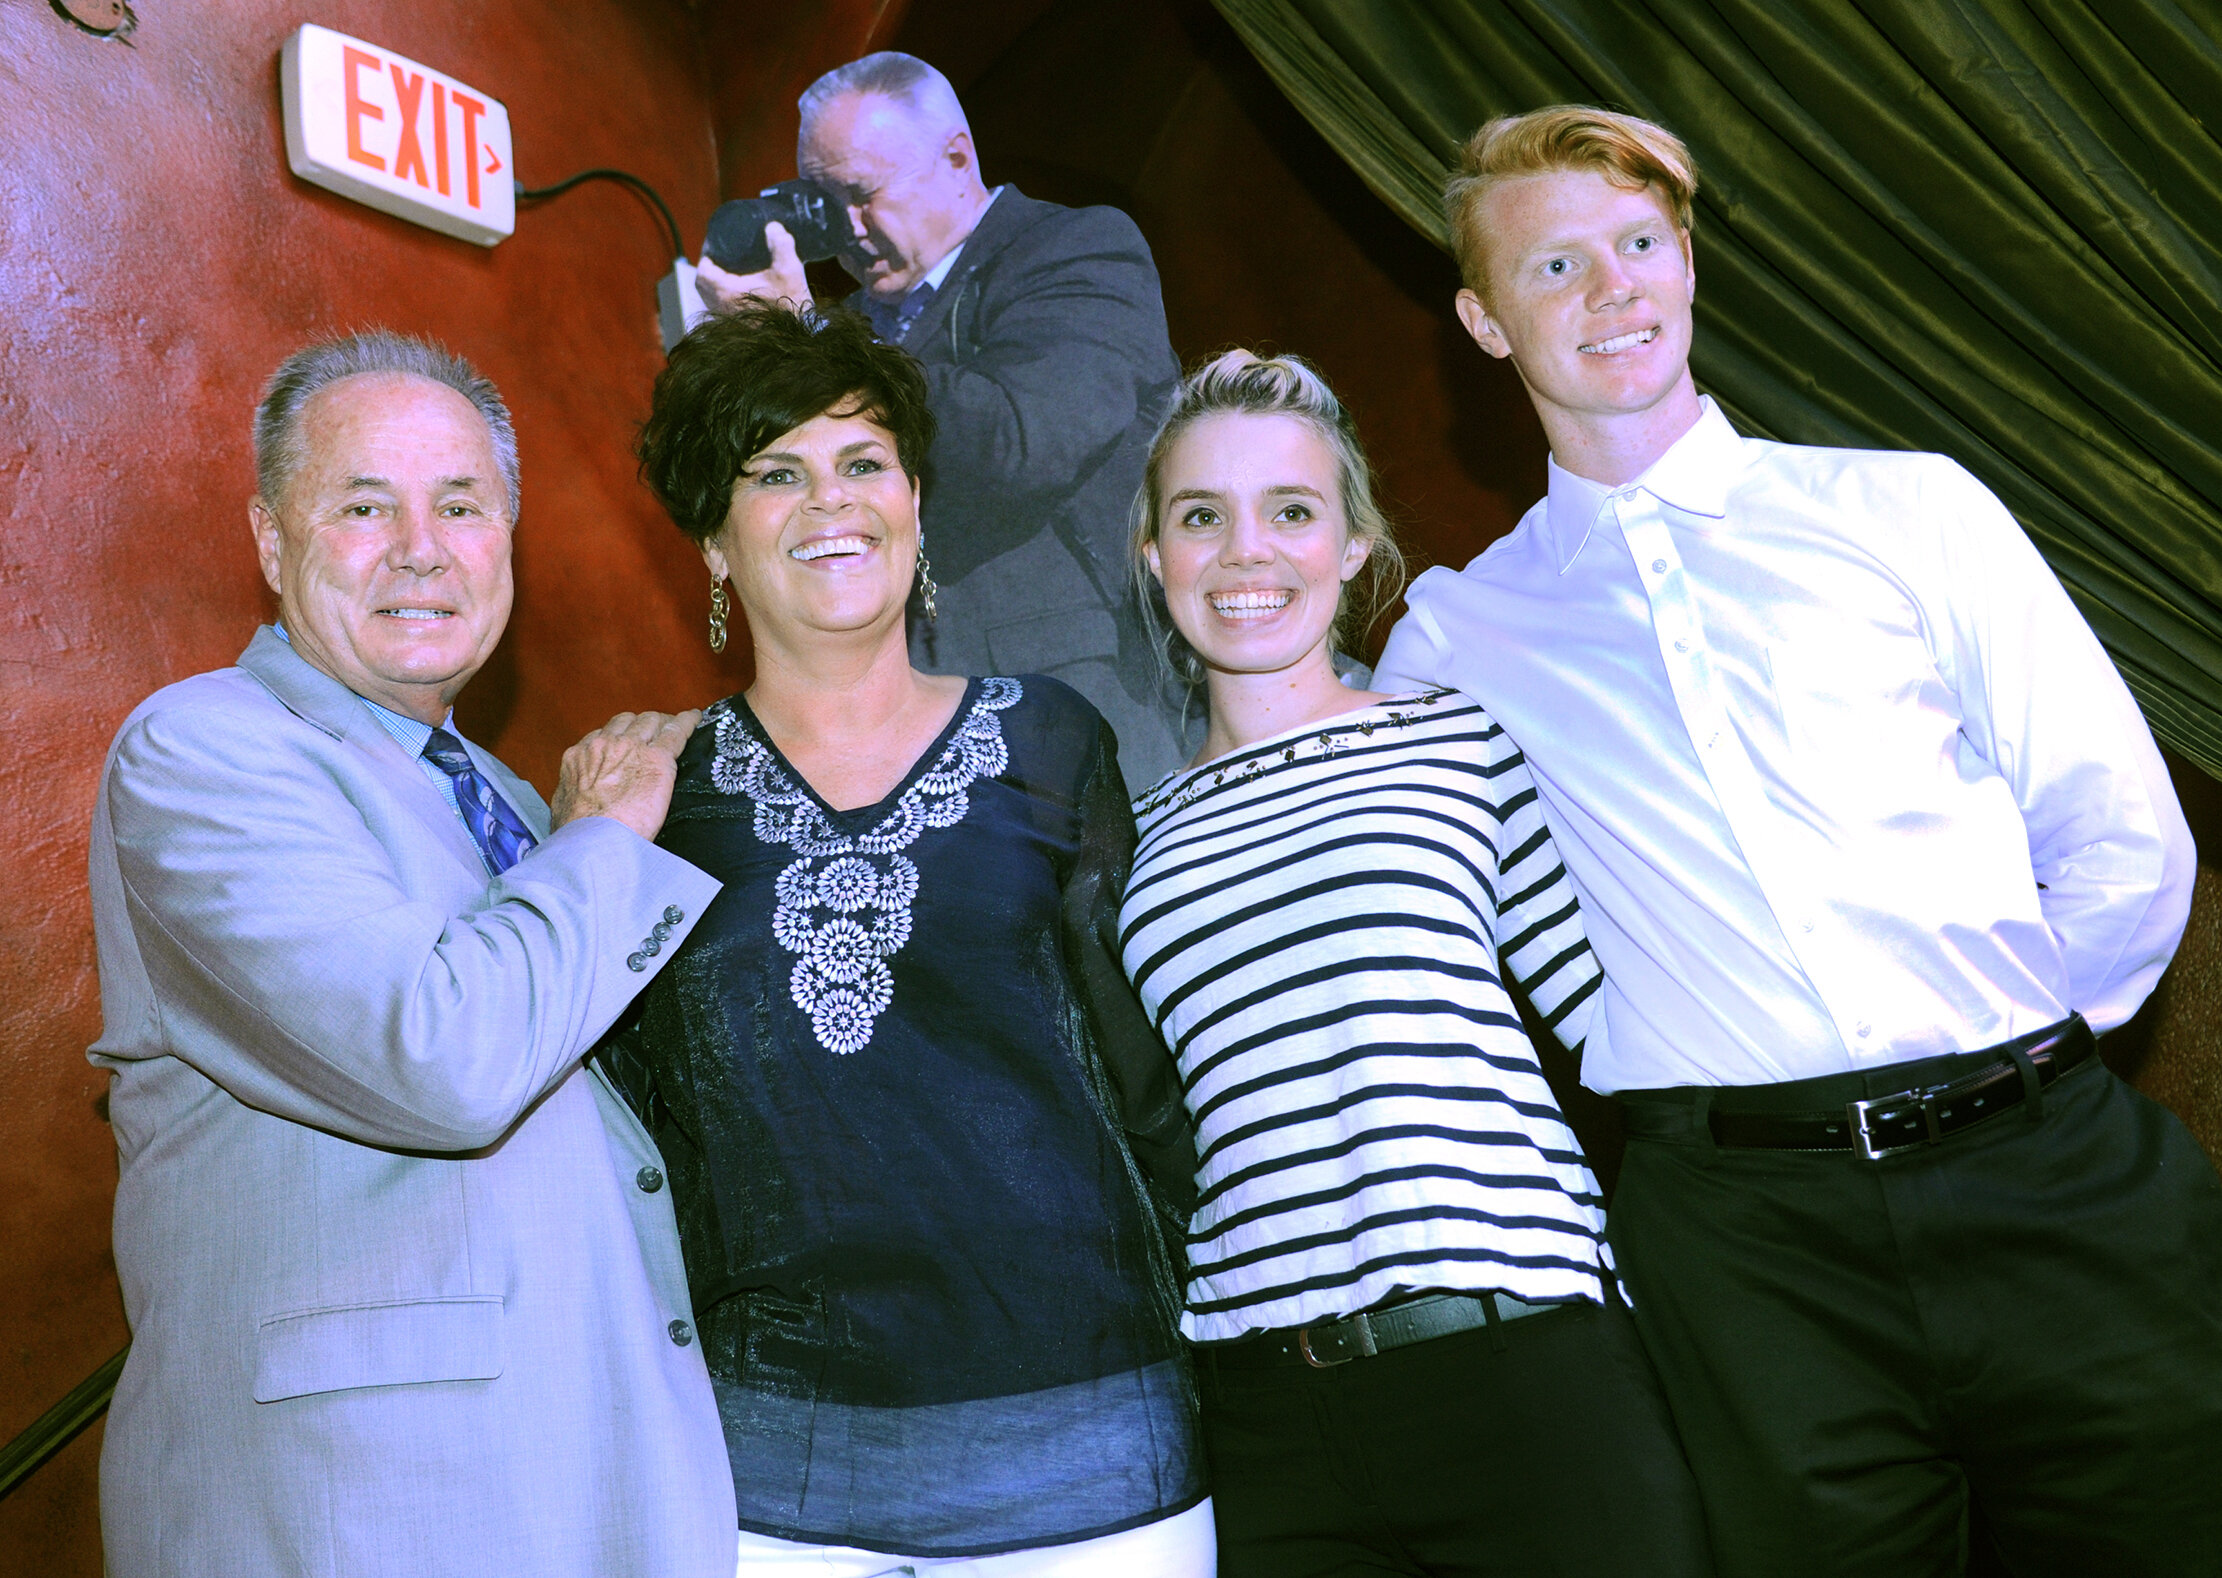  A cardboard cut-out of Tom LaBonge takes a photo of LaBonge with his wife Brigid, daughter Mary-Catherine and son Charles. A farewell party was held for Los Angeles City Councilman Tom LaBonge at the Avalon in Hollywood, CA 6/24/2015 (Photo by John 